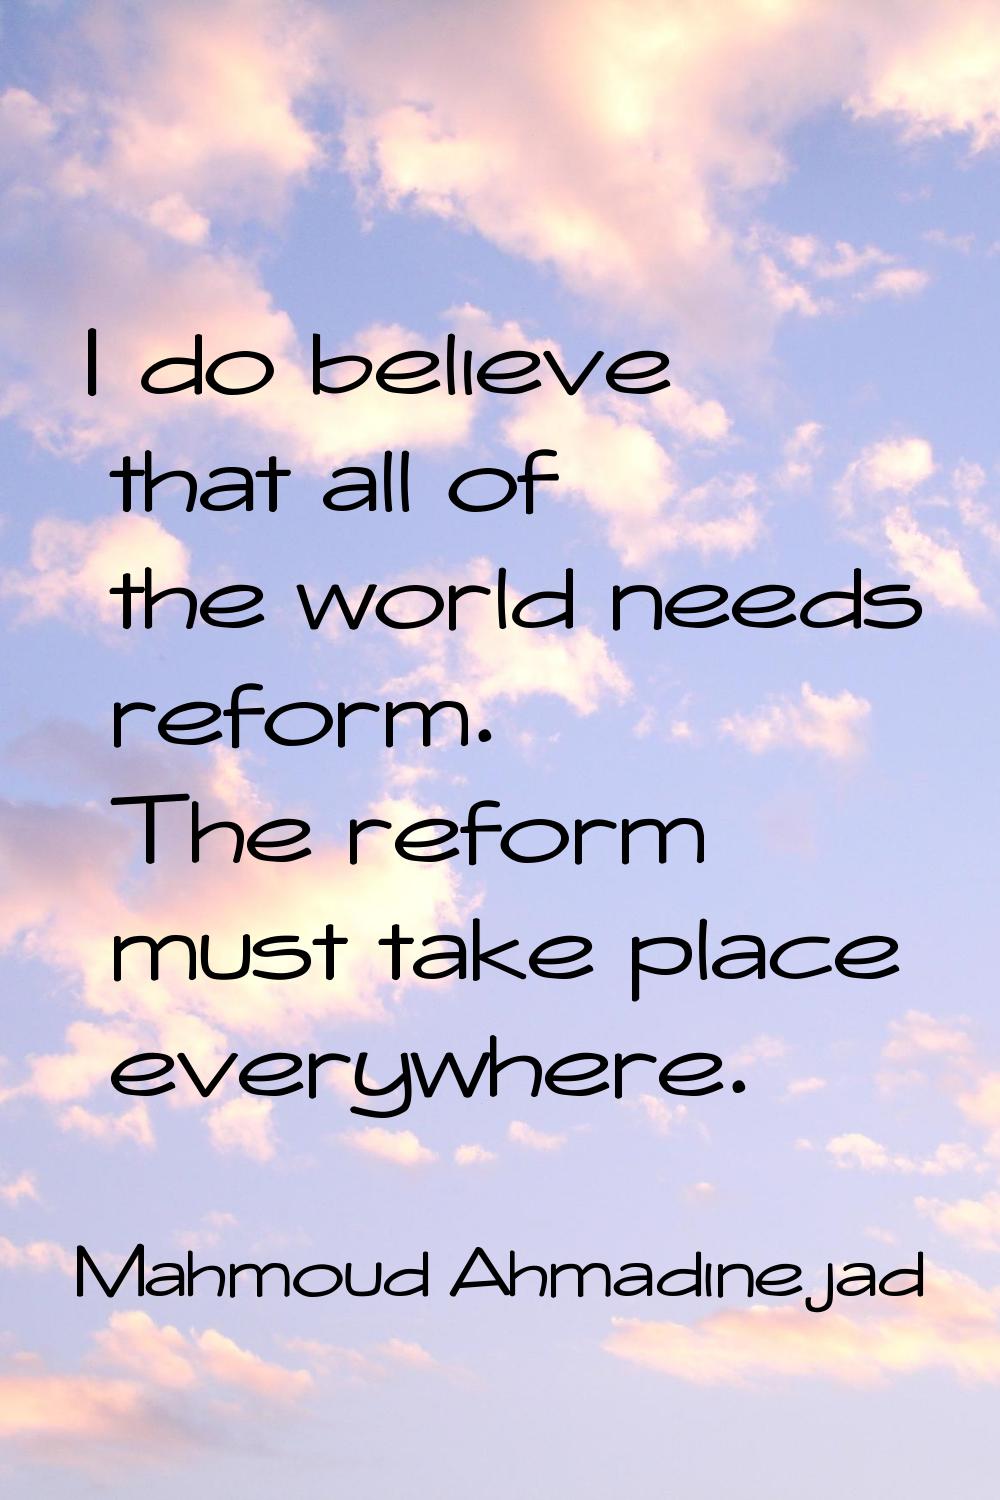 I do believe that all of the world needs reform. The reform must take place everywhere.